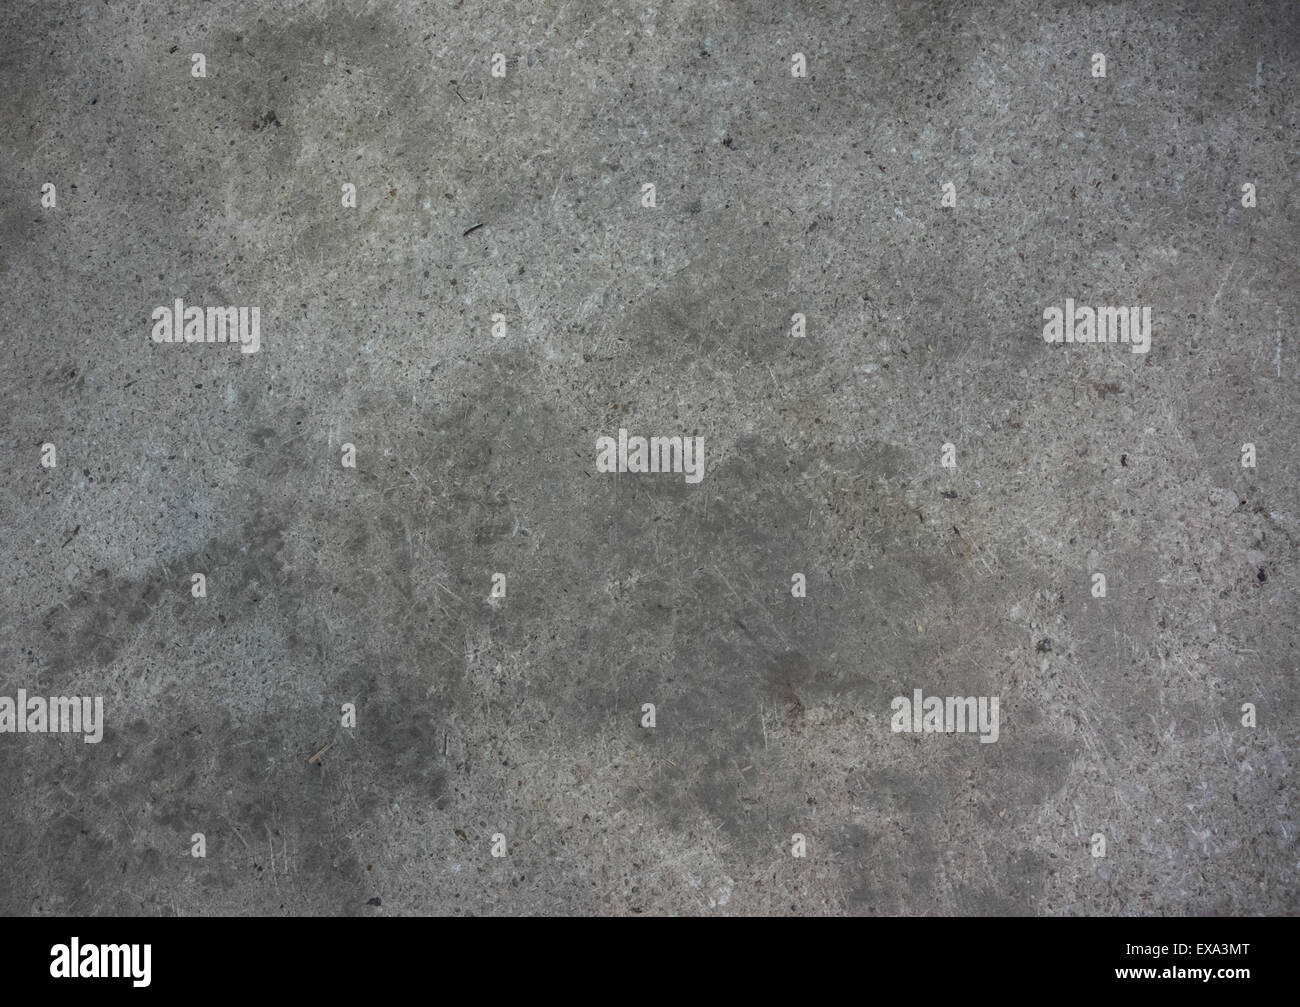 Background image of a gray concrete floor Stock Photo